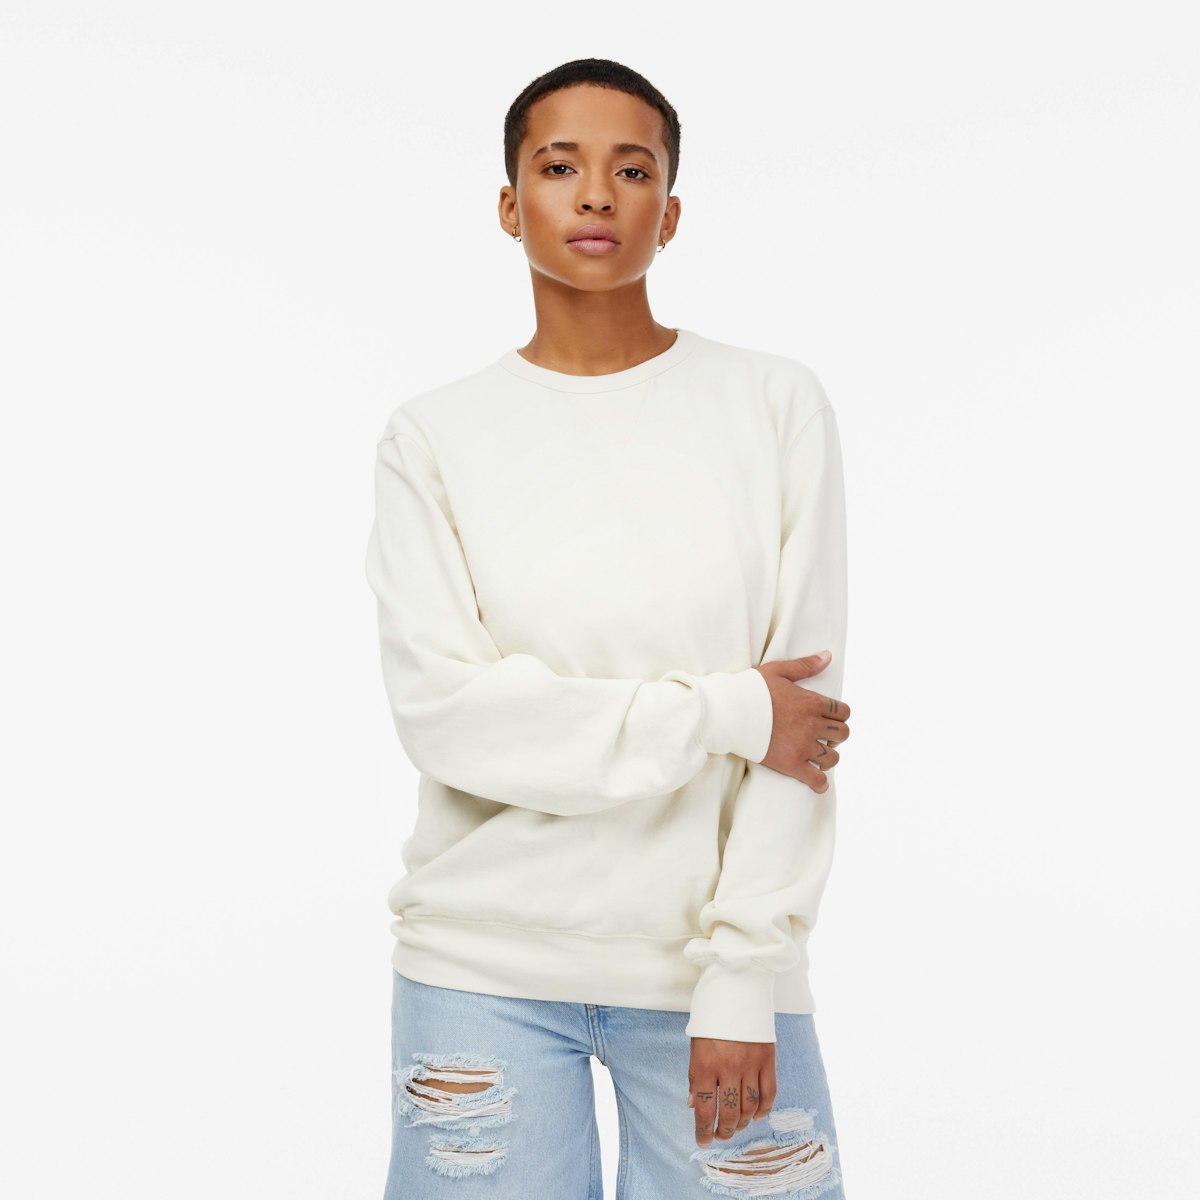 UnisexRecycledTerryPulloverCrew_OffWhite_Womens_OnFigure_1x1_1135.jpg